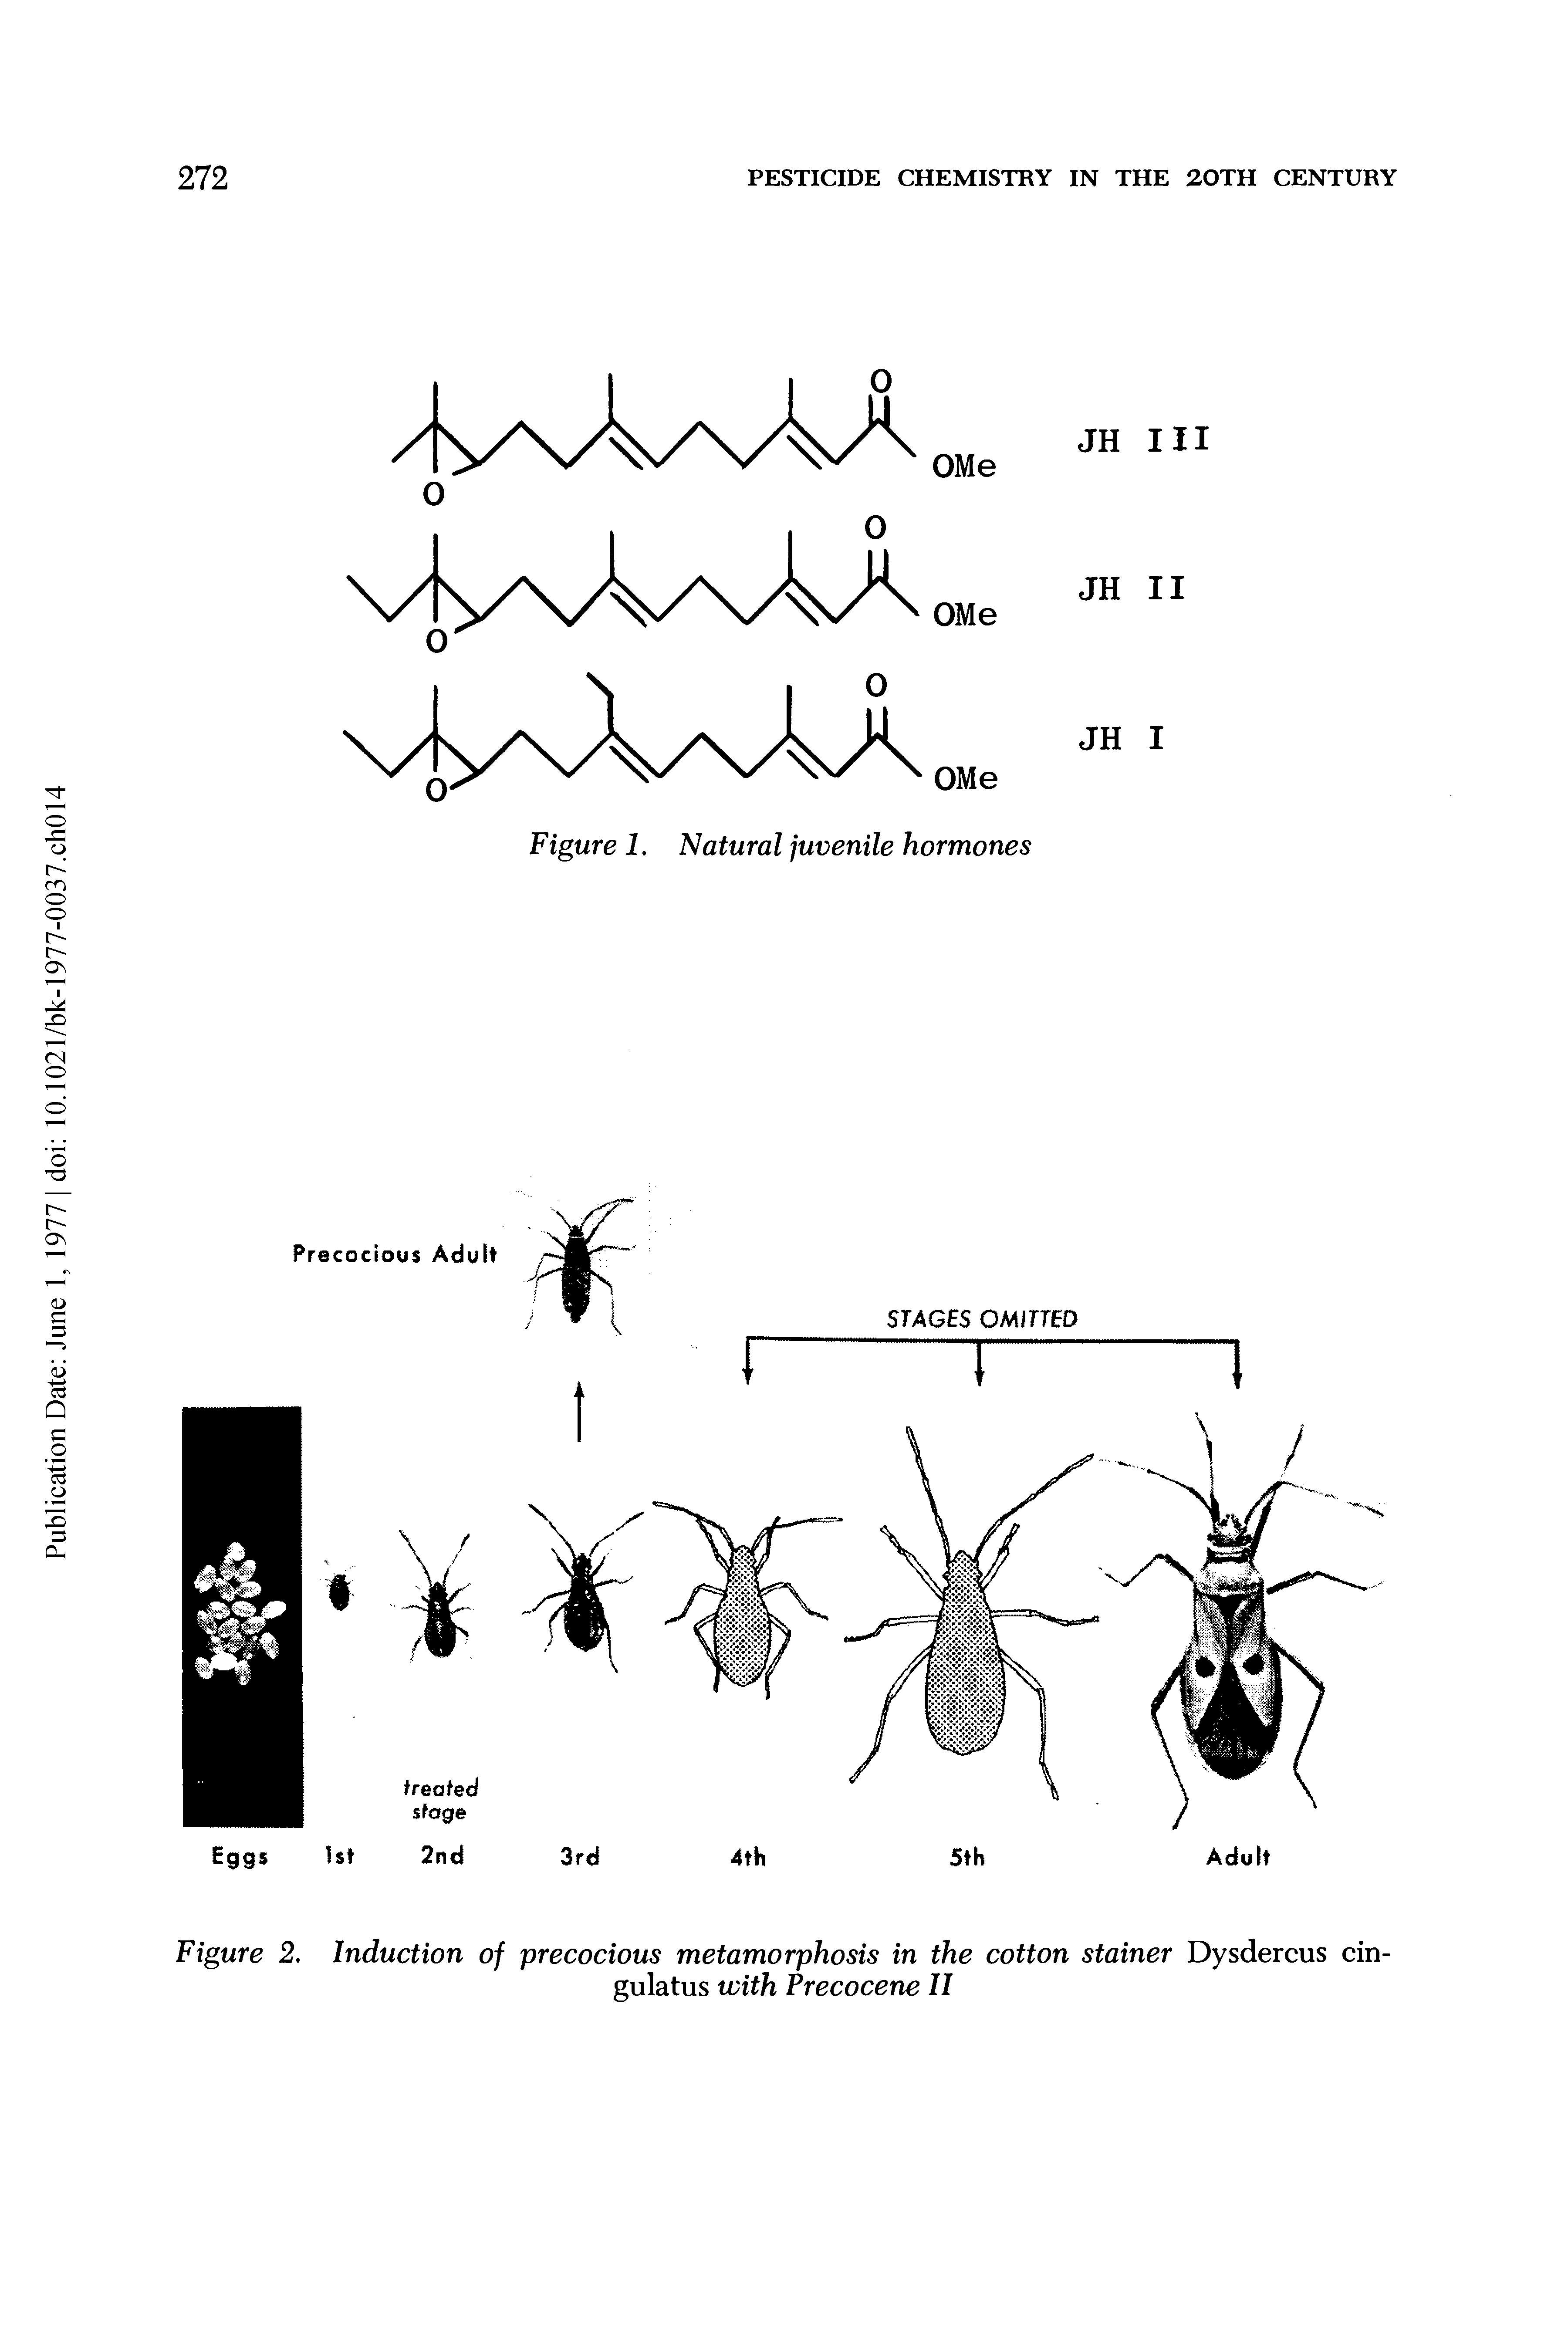 Figure 2. Induction of precocious metamorphosis in the cotton Stainer Dysdercus cin-...